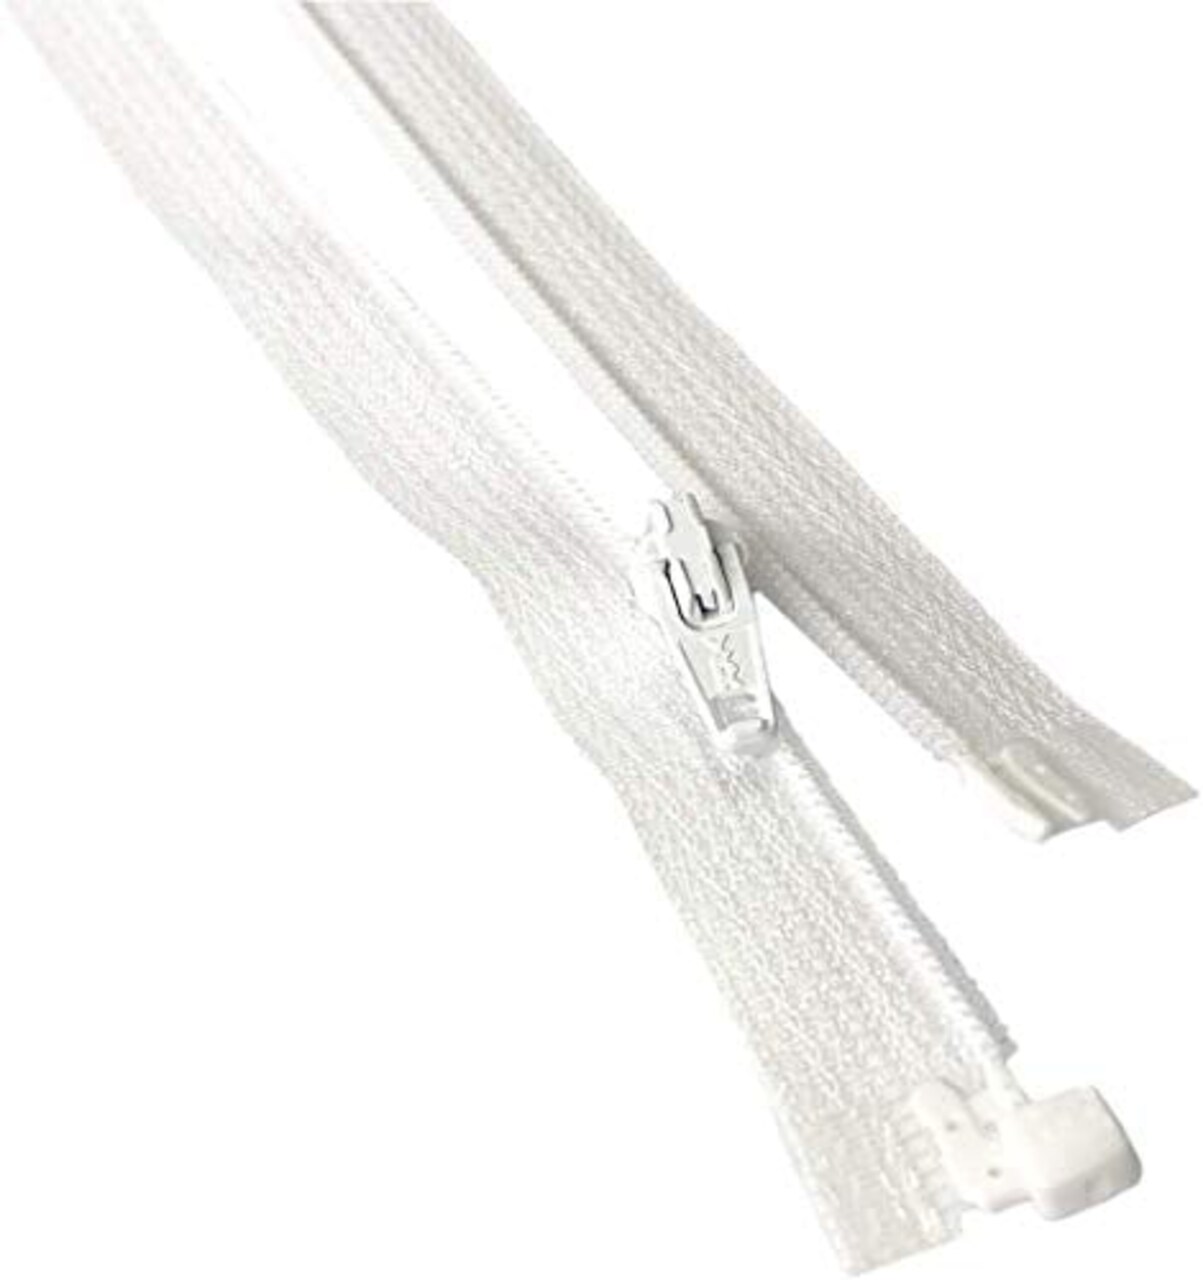 3 Coil Separating White YKK Zippers for Sewing Craft & Apparel - Color  White - Made in The United States (3 Zippers Per Pack) (10 Inches)